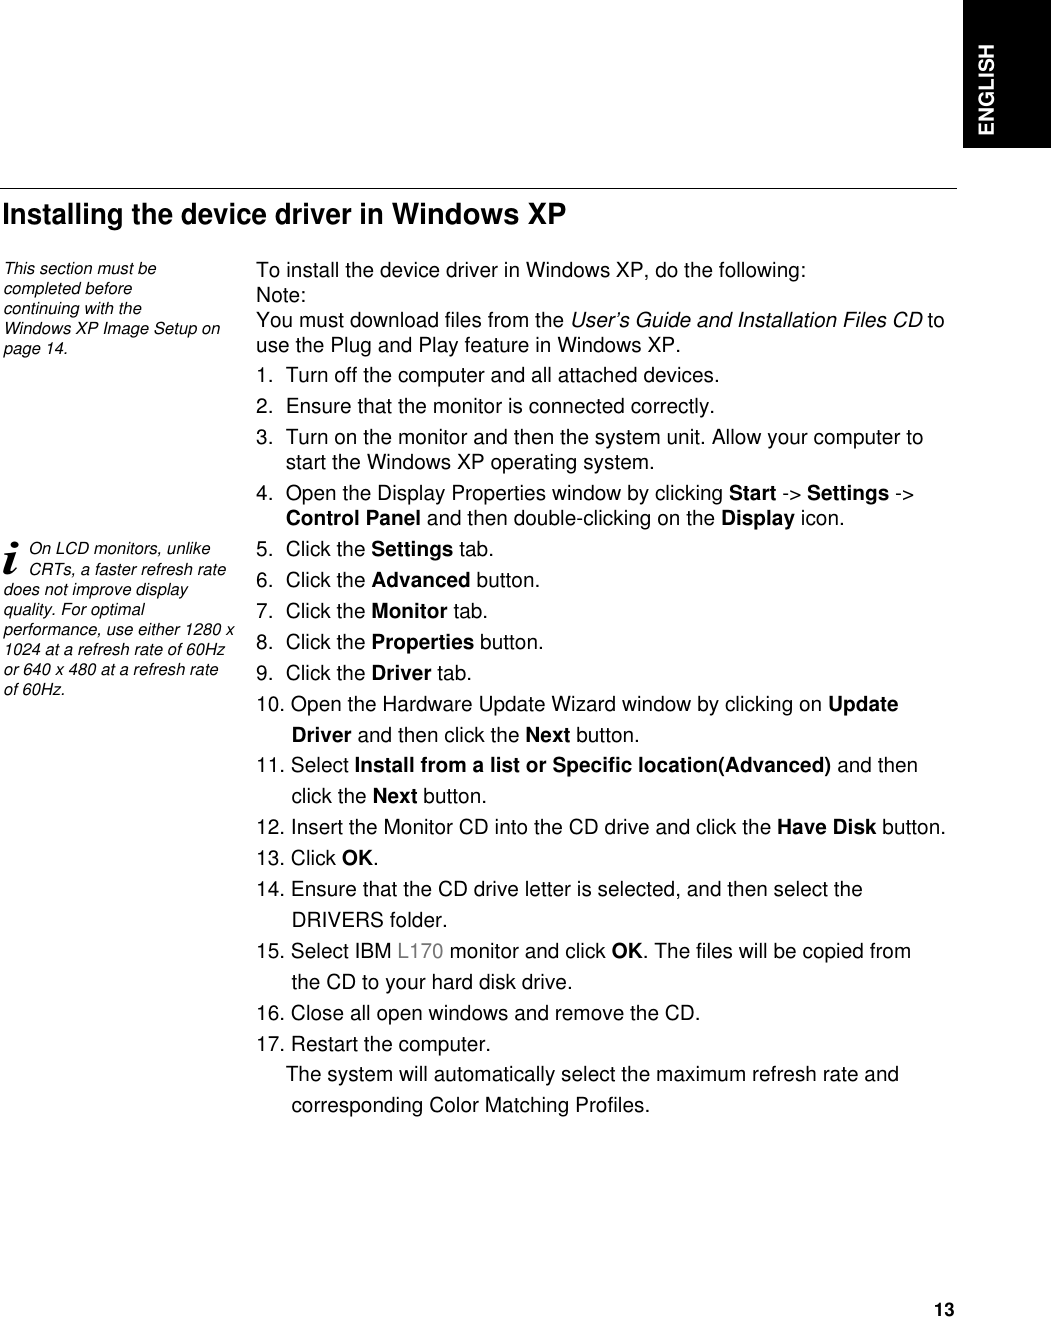 ENGLISH13To install the device driver in Windows XP, do the following: Note:You must download files from the User’s Guide and Installation Files CD touse the Plug and Play feature in Windows XP.1. Turn off the computer and all attached devices.2. Ensure that the monitor is connected correctly.3. Turn on the monitor and then the system unit. Allow your computer tostart the Windows XP operating system.4. Open the Display Properties window by clicking Start -&gt; Settings -&gt;Control Panel and then double-clicking on the Display icon.5. Click the Settings tab.6. Click the Advanced button.7. Click the Monitor tab.8. Click the Properties button.9. Click the Driver tab.10. Open the Hardware Update Wizard window by clicking on Update Driver and then click the Next button.11. Select Install from a list or Specific location(Advanced) and then click the Next button.12. Insert the Monitor CD into the CD drive and click the Have Disk button.13. Click OK.14. Ensure that the CD drive letter is selected, and then select the DRIVERS folder.15. Select IBM L170 monitor and click OK. The files will be copied from the CD to your hard disk drive.16. Close all open windows and remove the CD.17. Restart the computer.The system will automatically select the maximum refresh rate and corresponding Color Matching Profiles.Installing the device driver in Windows XP This section must becompleted before continuing with the Windows XP Image Setup onpage 14.iOn LCD monitors, unlikeCRTs, a faster refresh ratedoes not improve displayquality. For optimalperformance, use either 1280 x1024 at a refresh rate of 60Hzor 640 x 480 at a refresh rateof 60Hz.